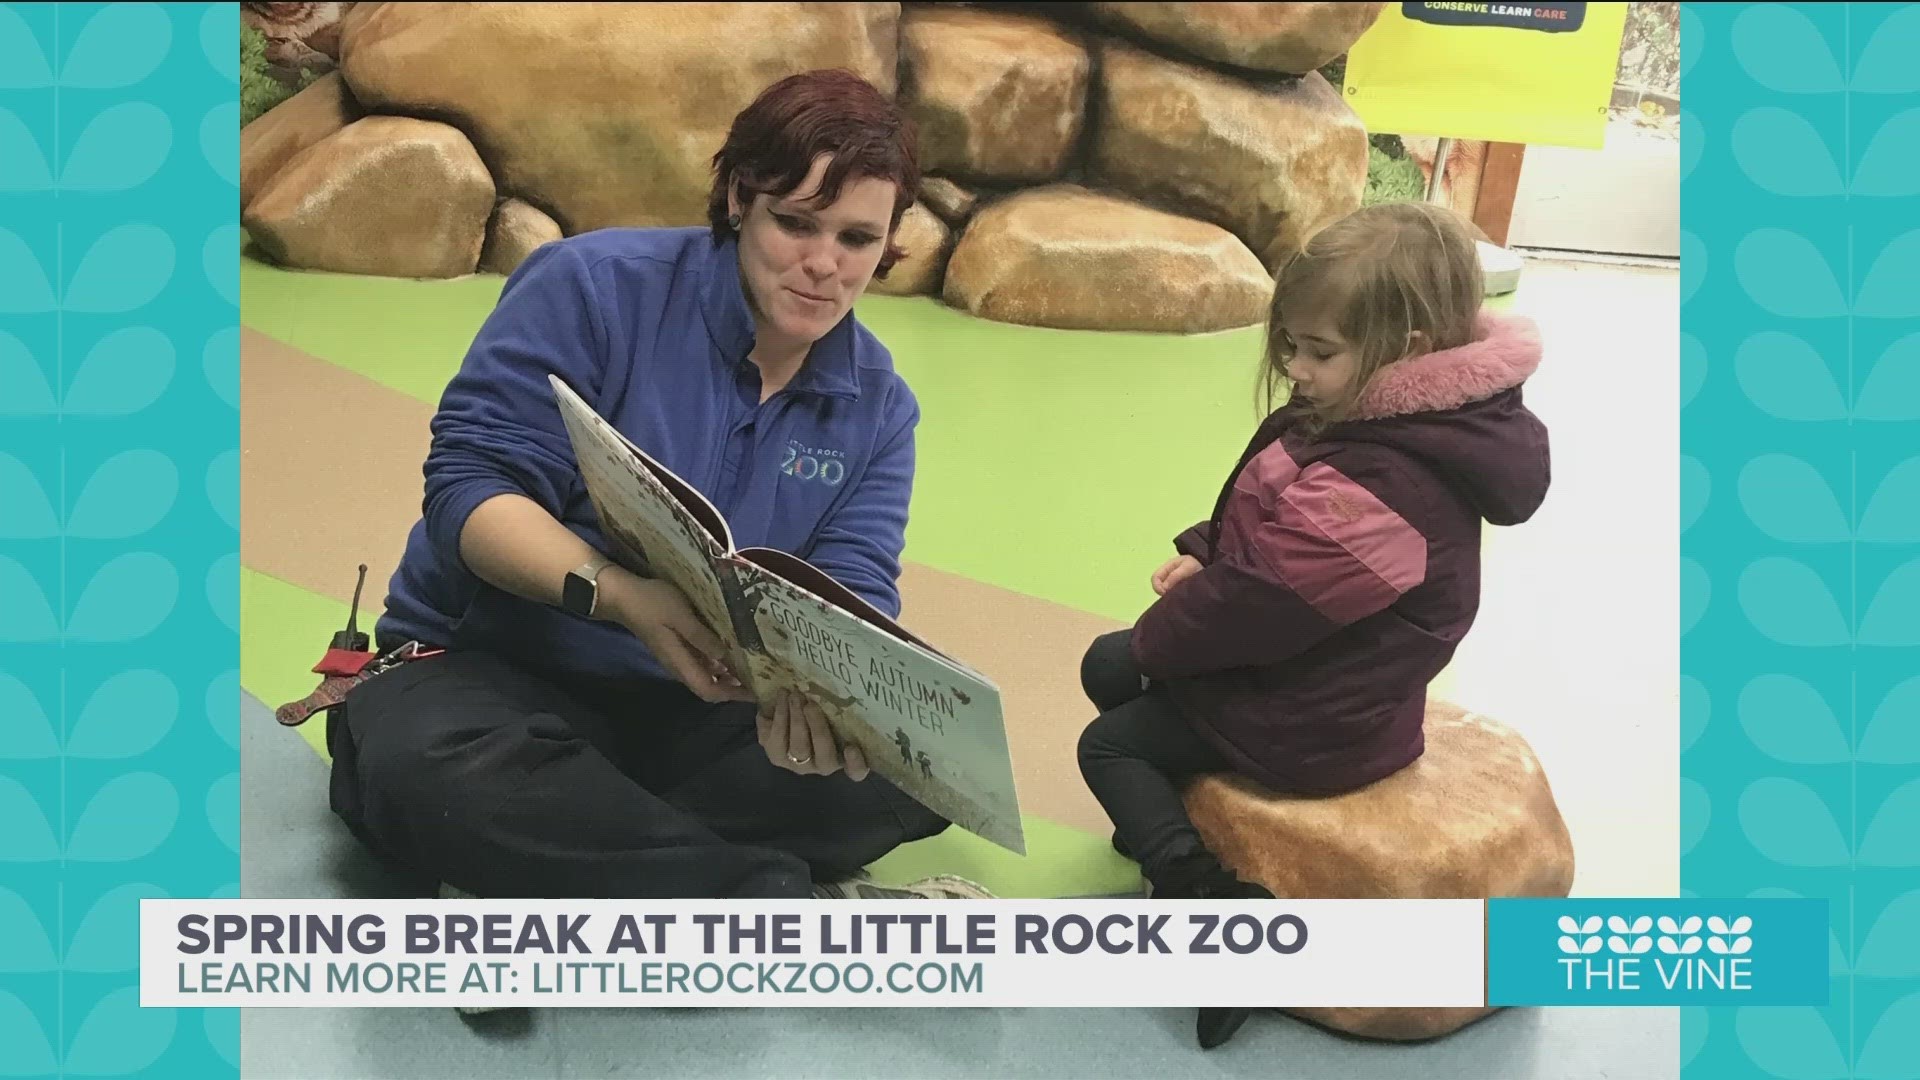 Learn more at littlerockzoo.com!